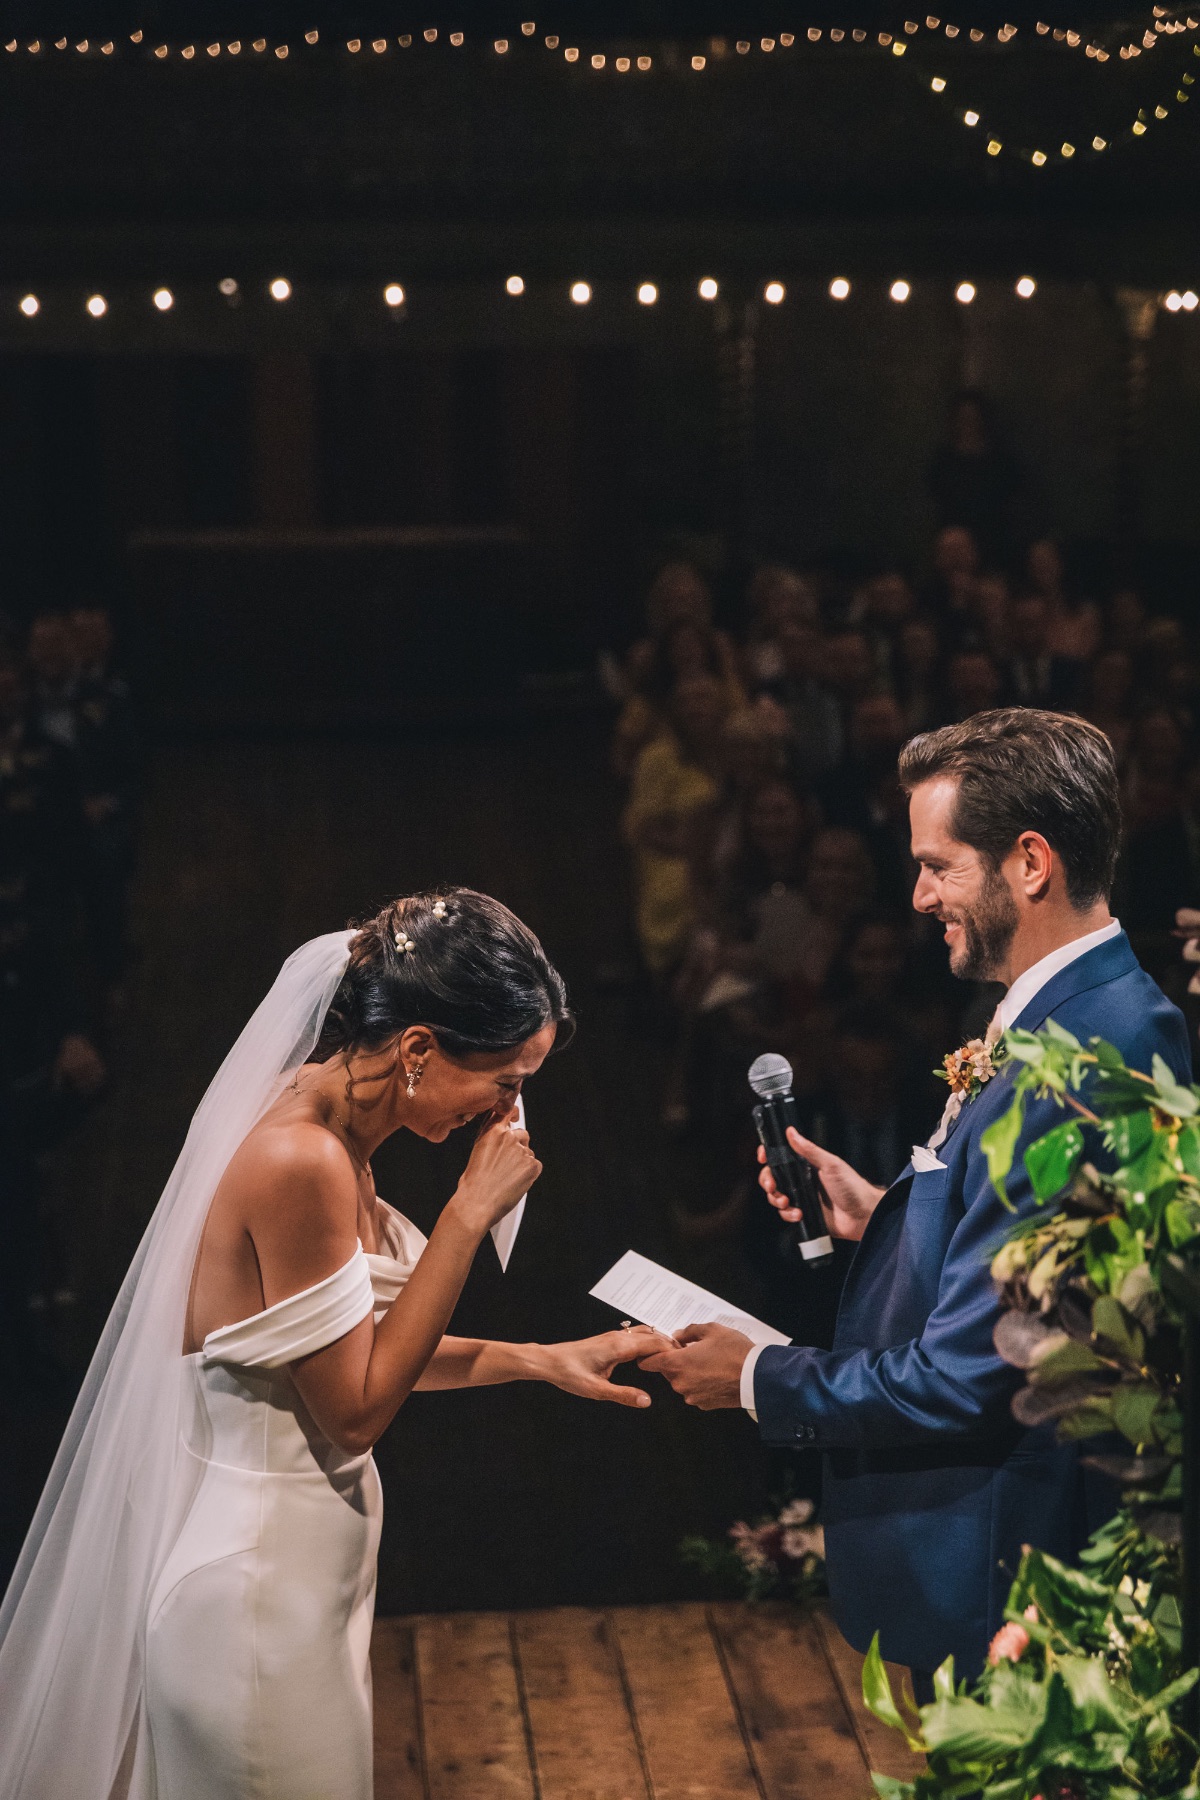 speaking the hand written vows to each other